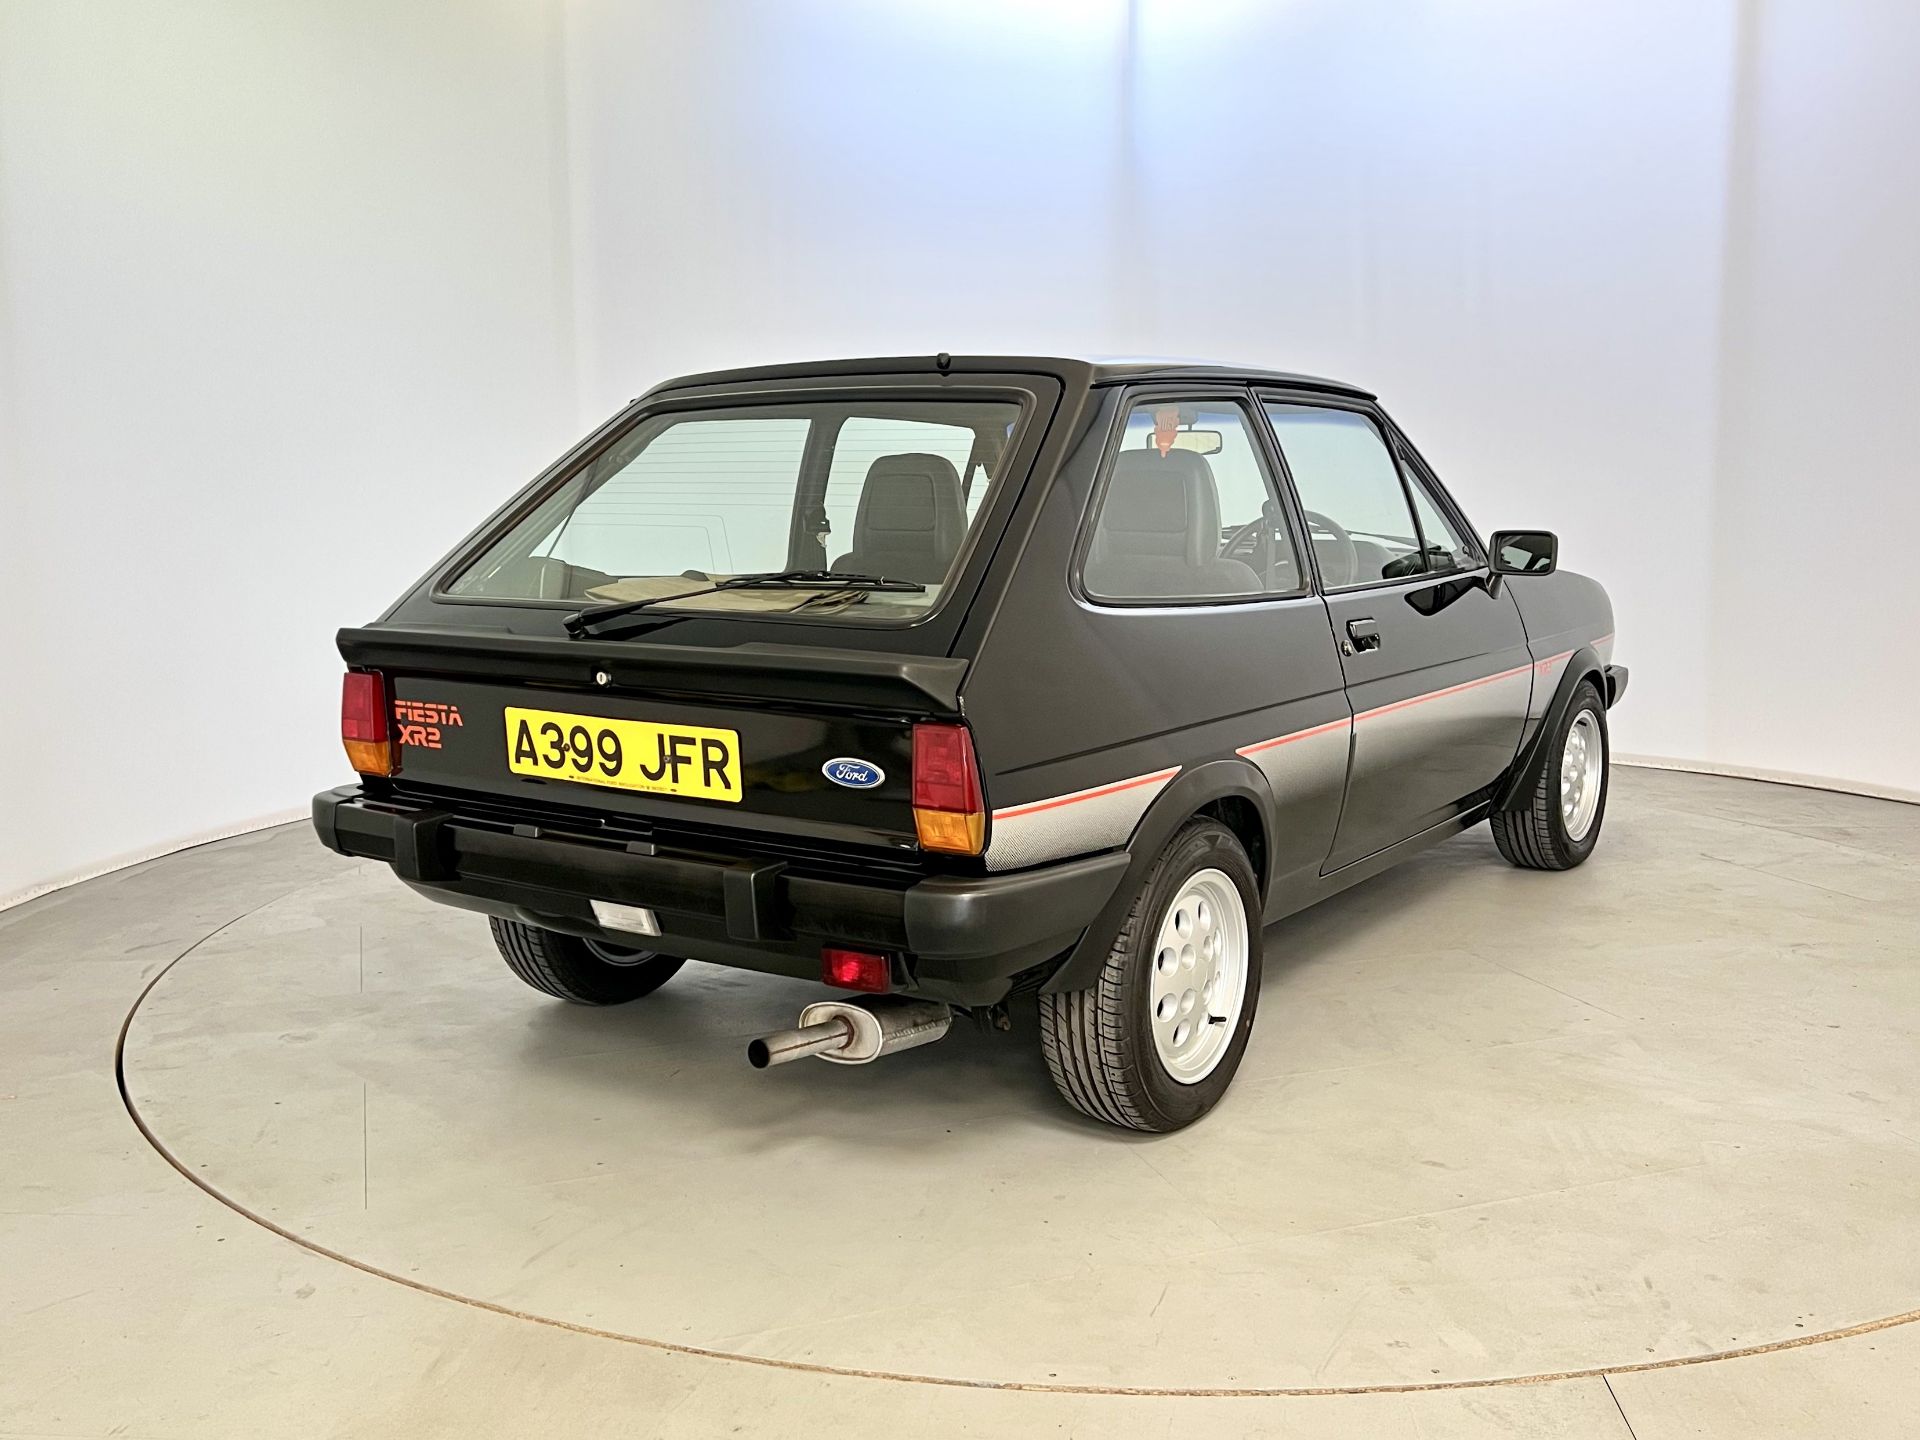 Ford Fiesta XR2 - Image 9 of 33